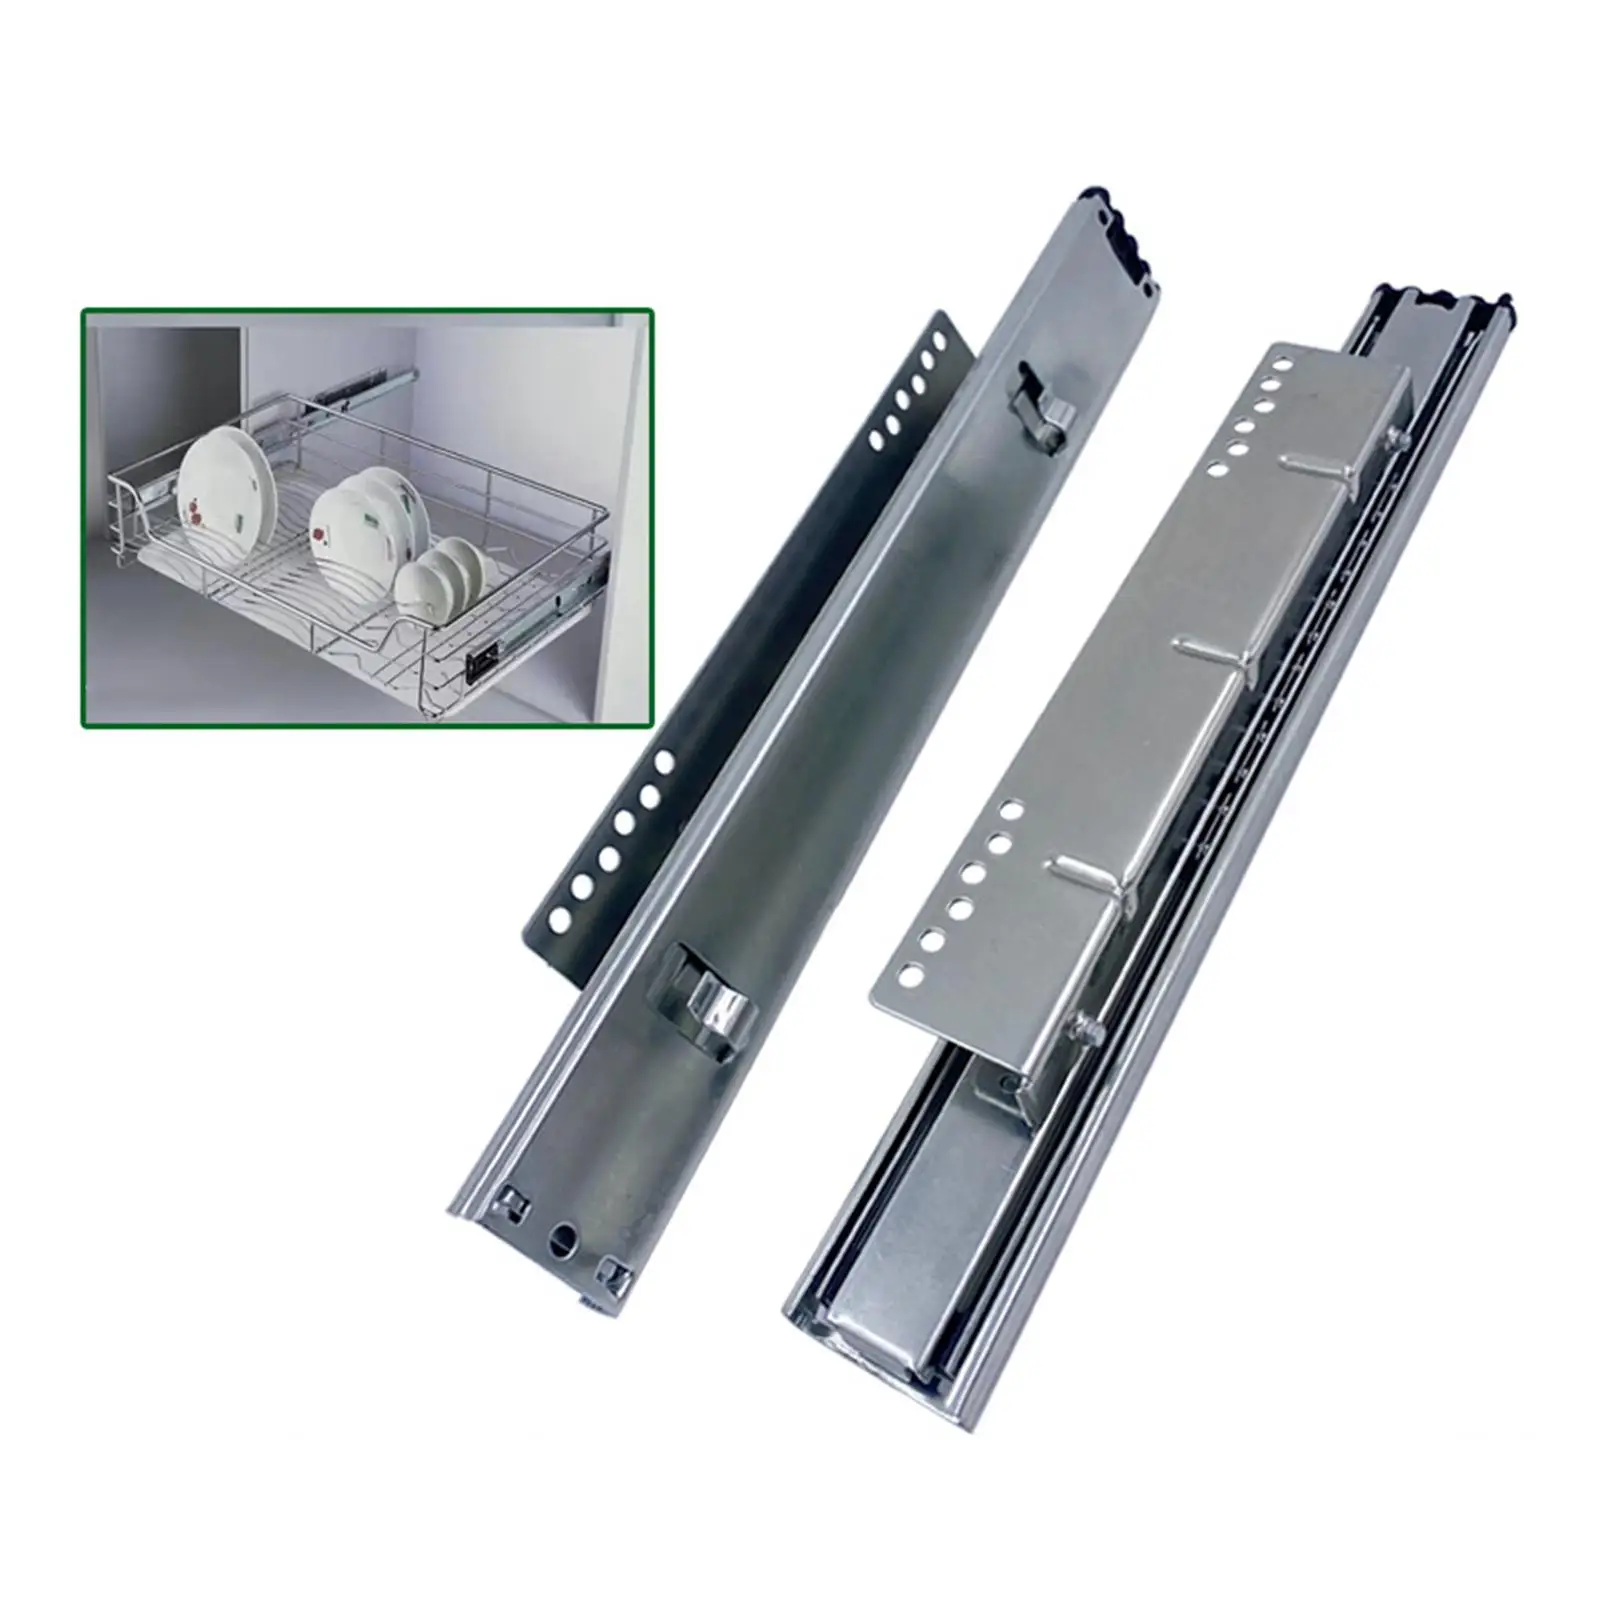 1 Pair Drawer Slides Cabinet Pull Out Rail for Cabinet Furniture Kitchen